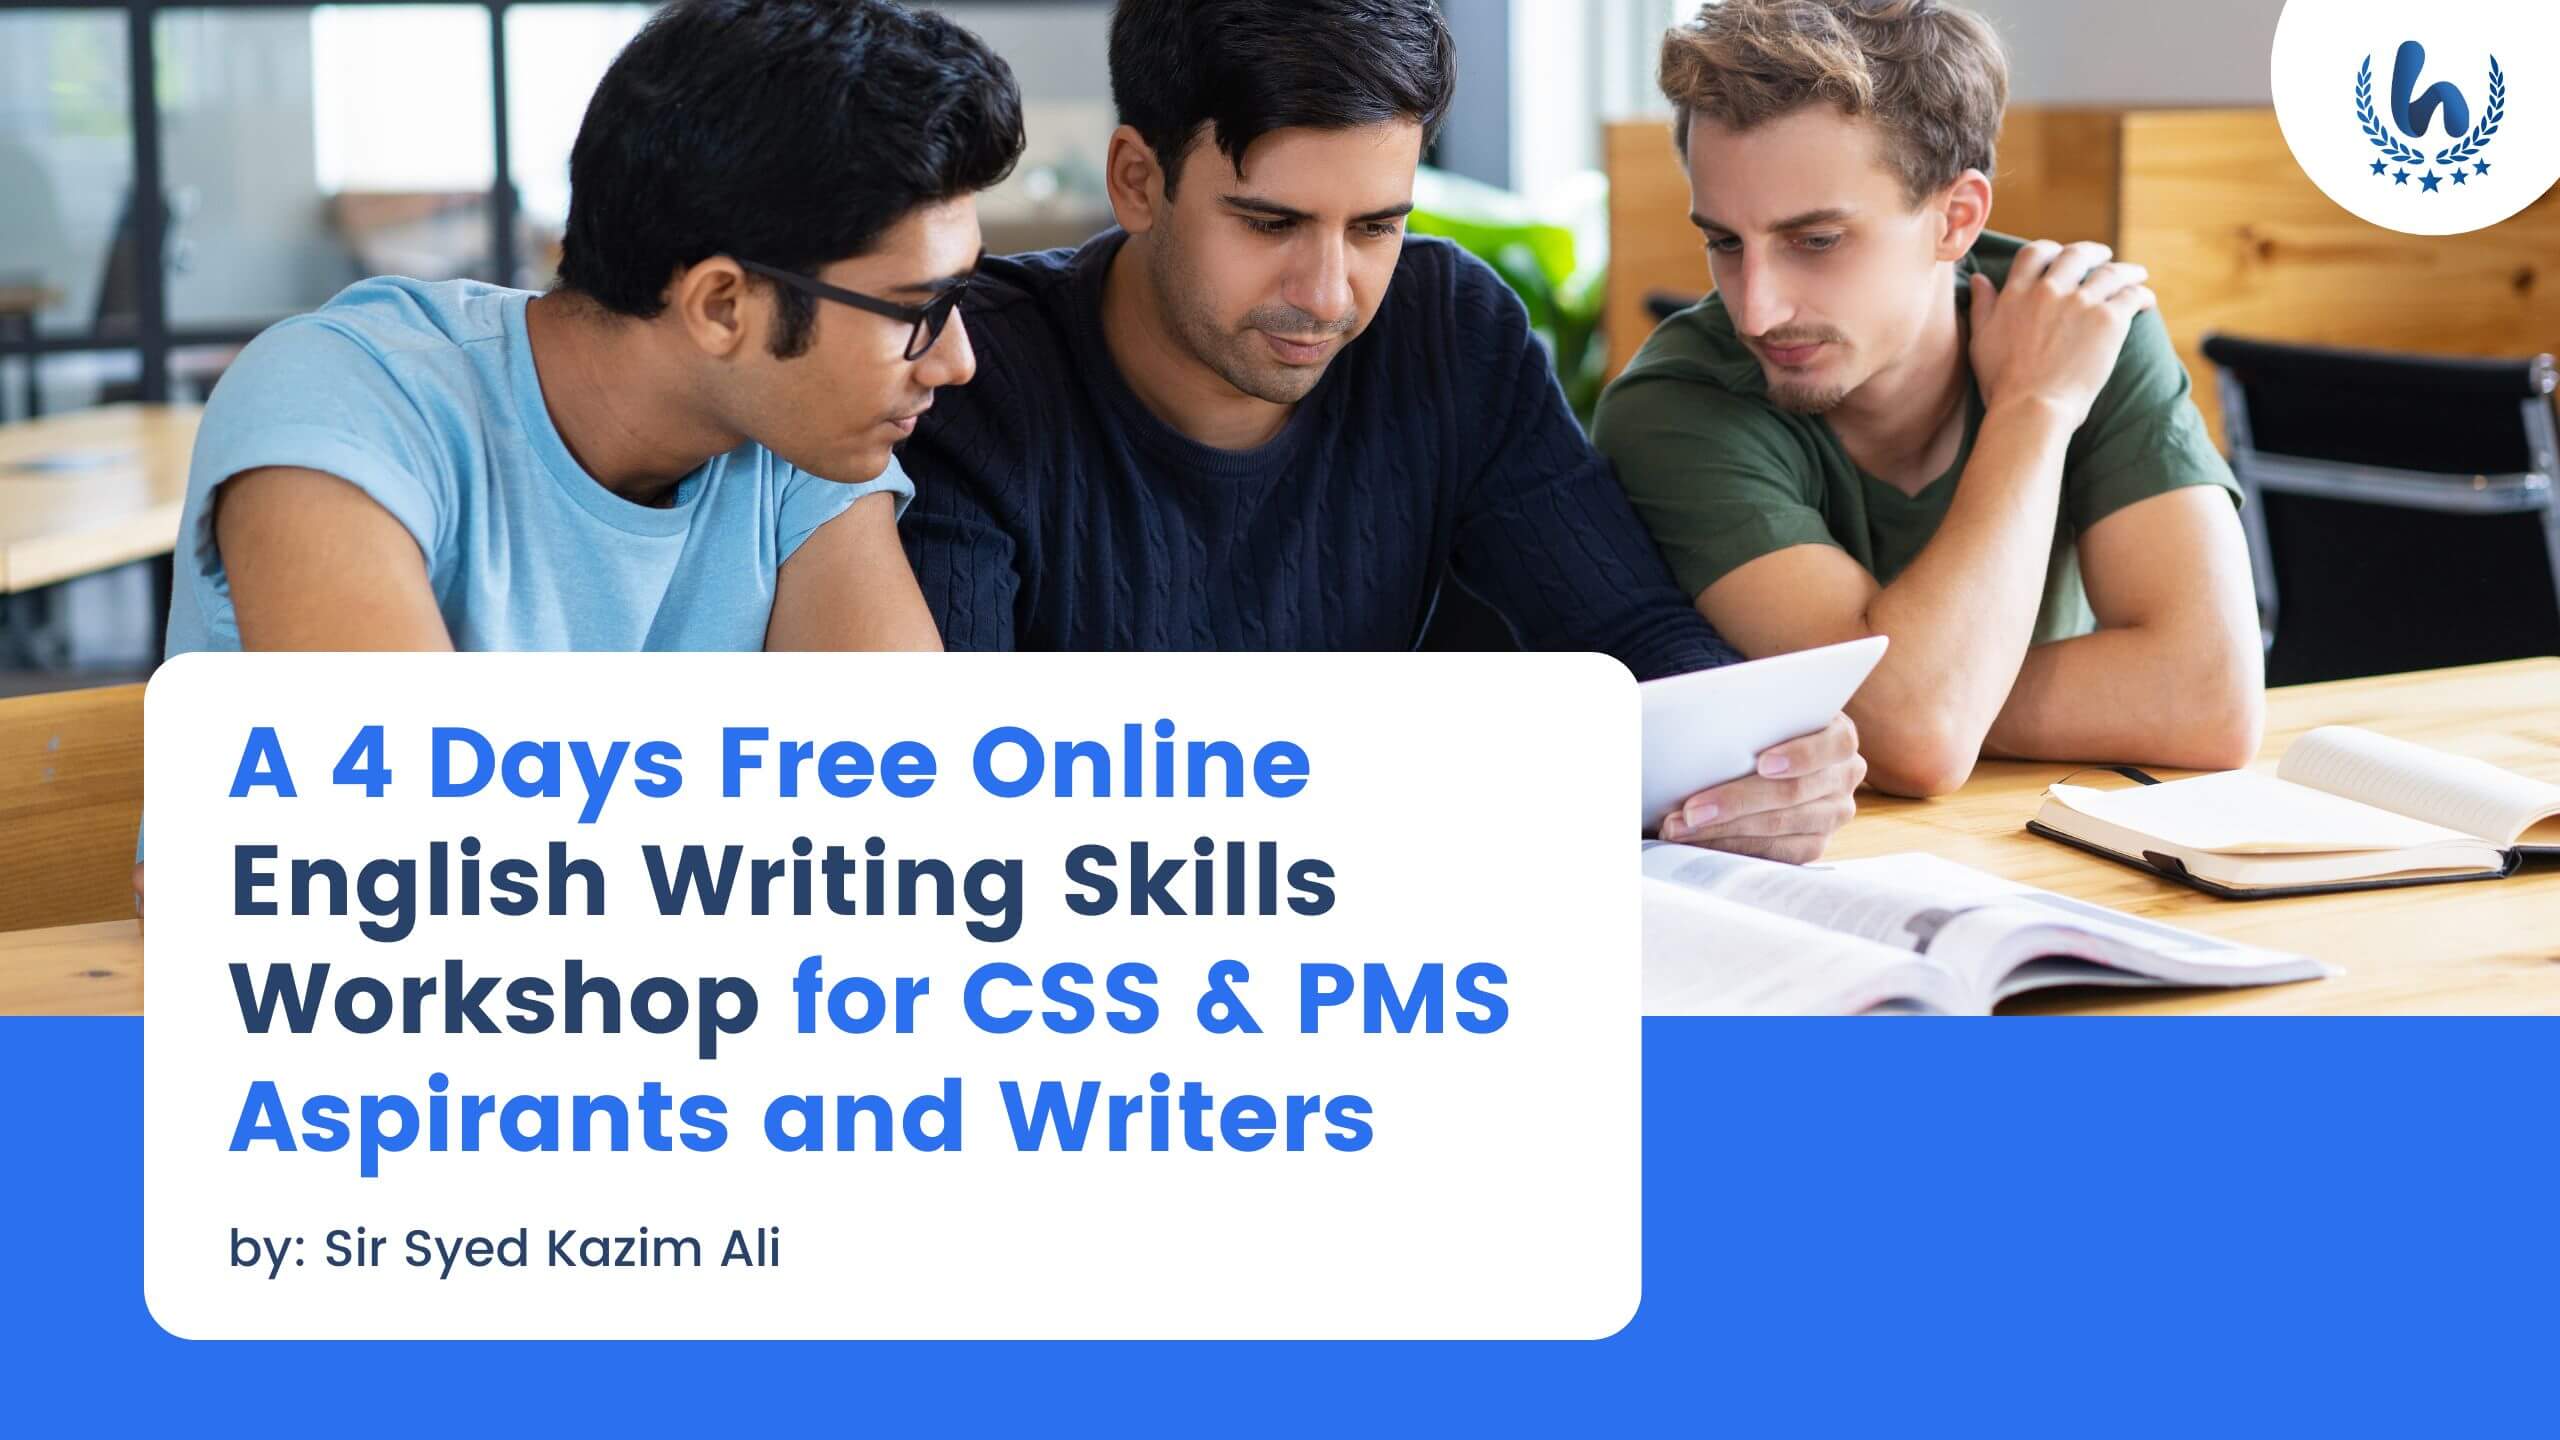 Online-English-Writing-Skills-Workshop-for-CSS-and-PMS-Aspirants